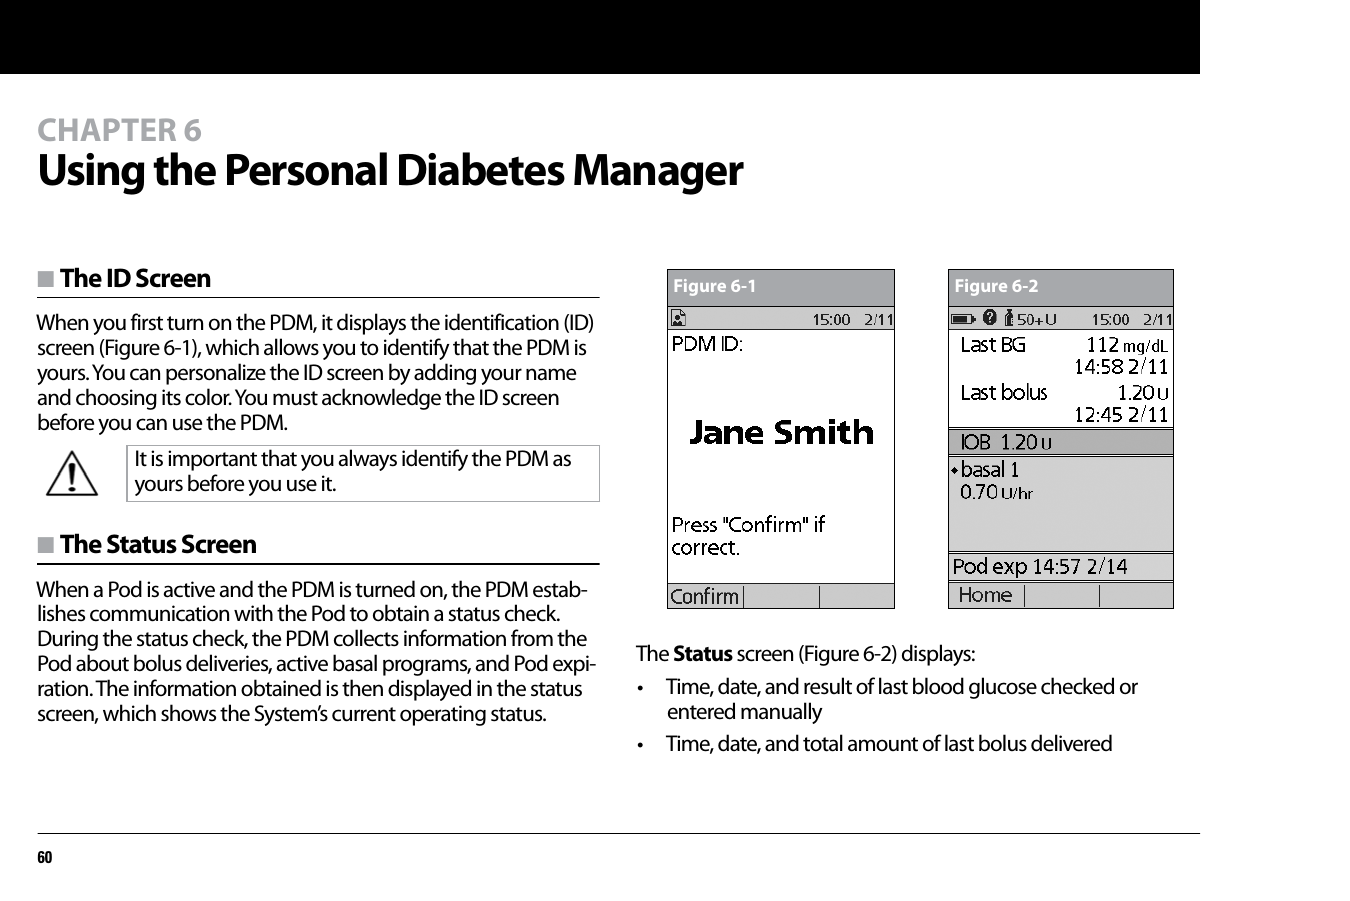 60CHAPTER 6Using the Personal Diabetes Managern The ID ScreenWhen you first turn on the PDM, it displays the identification (ID) screen (Figure 6-1), which allows you to identify that the PDM is yours. You can personalize the ID screen by adding your name and choosing its color. You must acknowledge the ID screen before you can use the PDM. n The Status ScreenWhen a Pod is active and the PDM is turned on, the PDM estab-lishes communication with the Pod to obtain a status check. During the status check, the PDM collects information from the Pod about bolus deliveries, active basal programs, and Pod expi-ration. The information obtained is then displayed in the status screen, which shows the System’s current operating status.The Status screen (Figure 6-2) displays:• Time, date, and result of last blood glucose checked or entered manually• Time, date, and total amount of last bolus deliveredIt is important that you always identify the PDM as yours before you use it.Figure 6-1 Figure 6-2